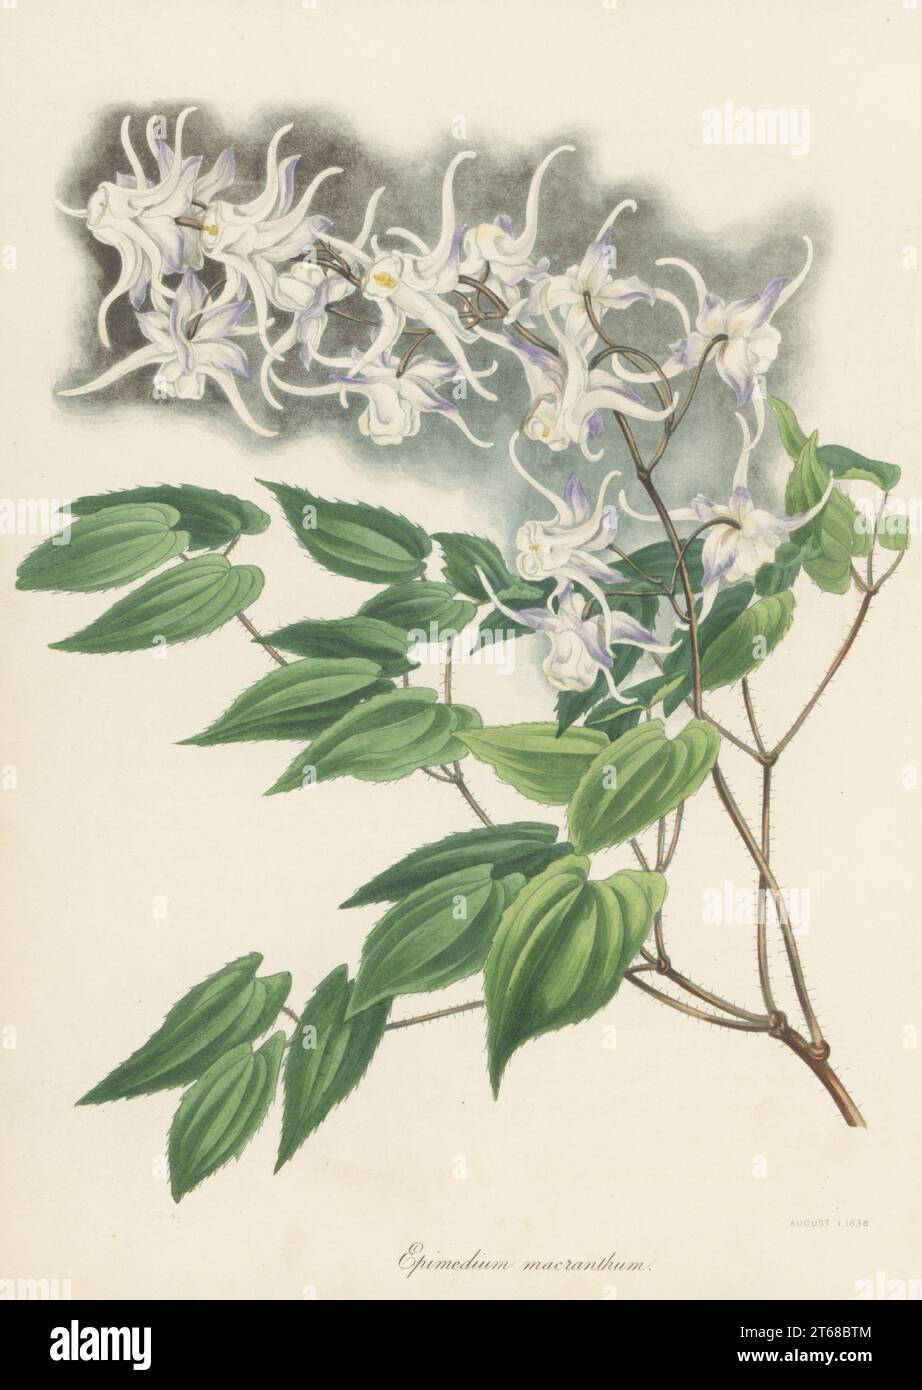 Large flowered barrenwort or bishop's hat, Epimedium grandiflorum. Native to Japan and Korea, introduced by German botanist Philipp Franz von Siebold. Large flowered barren-wort, Epimedium macranthum. Handcoloured lithograph from Joseph Paxtons Magazine of Botany, and Register of Flowering Plants, Volume 5, Orr and Smith, London, 1838. Stock Photo